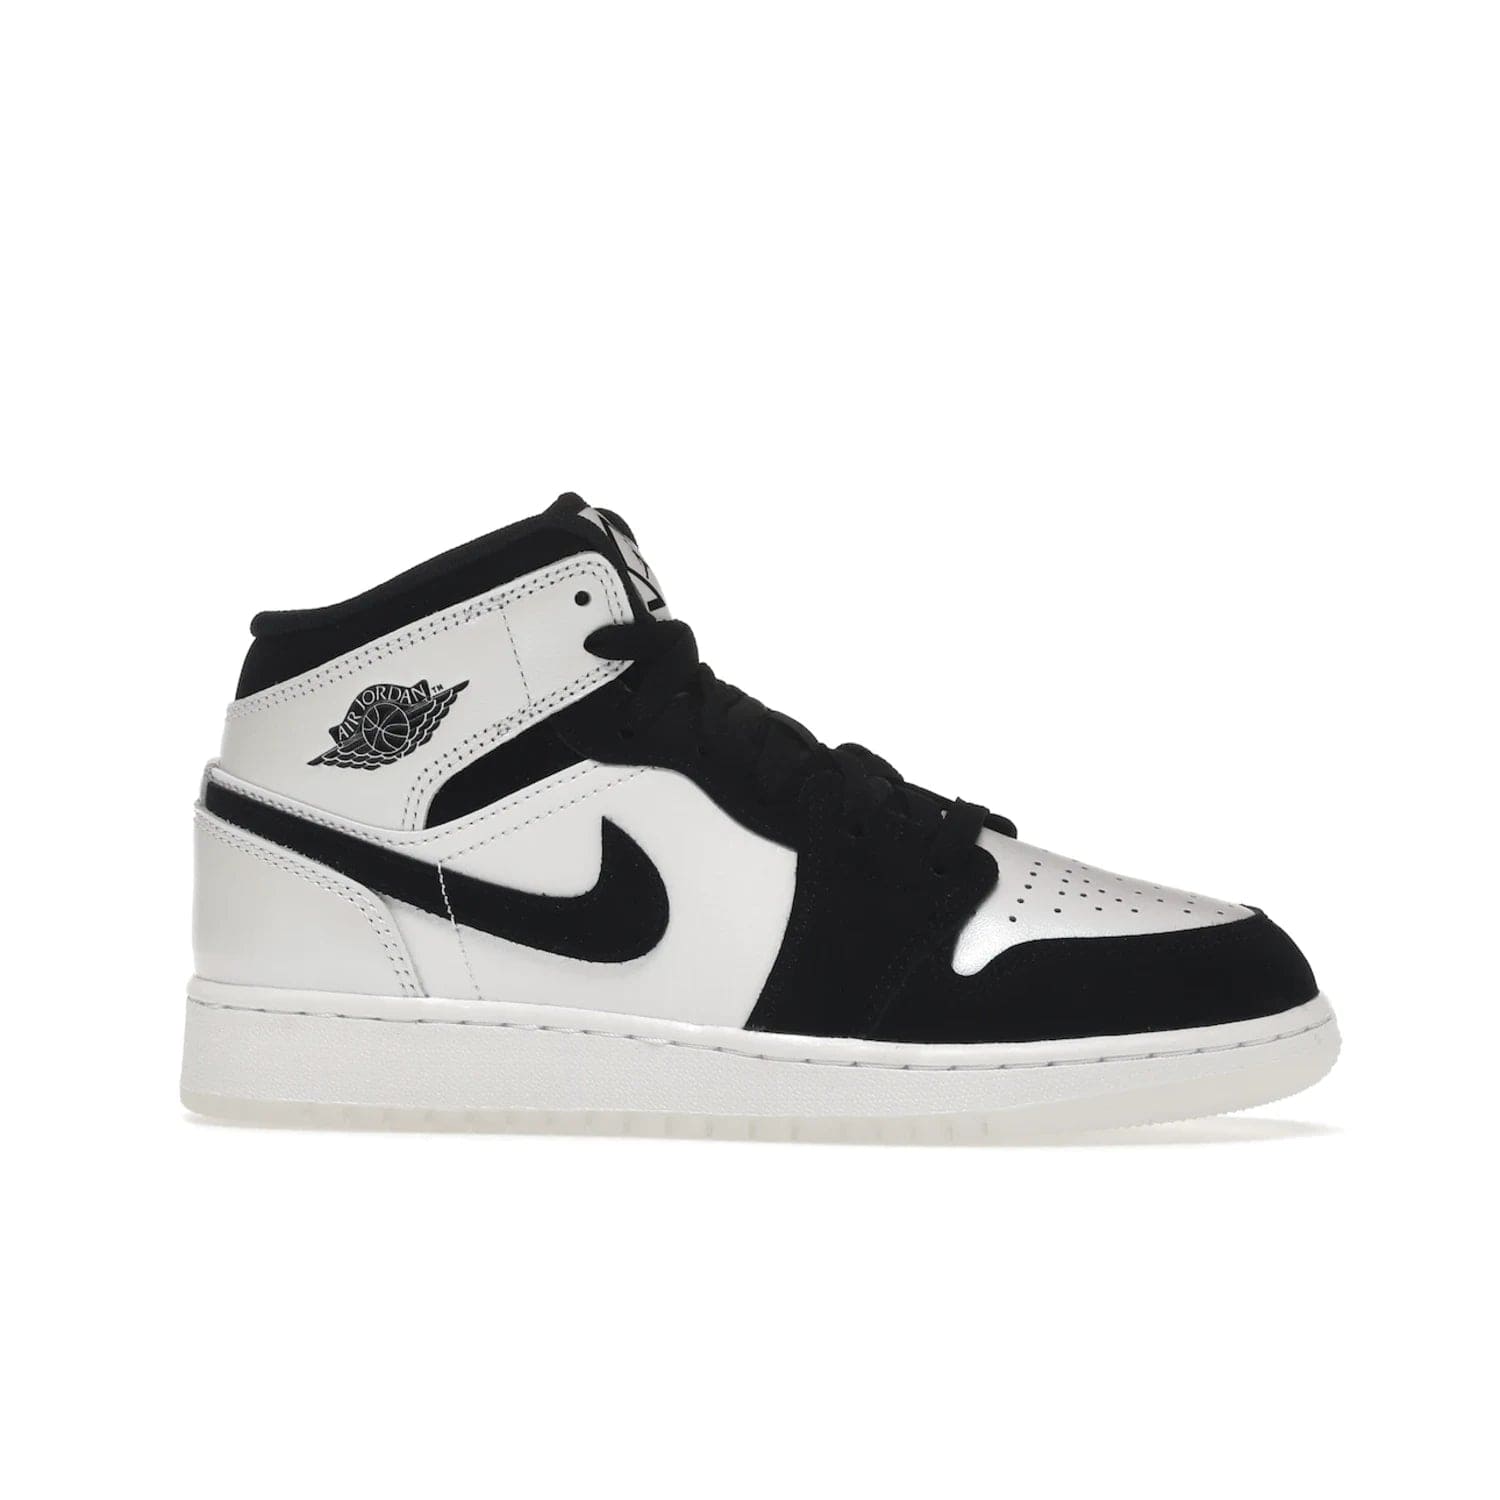 Jordan 1 Mid Diamond Shorts (GS) - Image 2 - Only at www.BallersClubKickz.com - Get the Jordan 1 Mid Diamond Shorts GS on 9th Feb 2022! Features a white, black & suede design with nylon tongue, stamped wings logo, rubber midsole & outsole. Only $100!